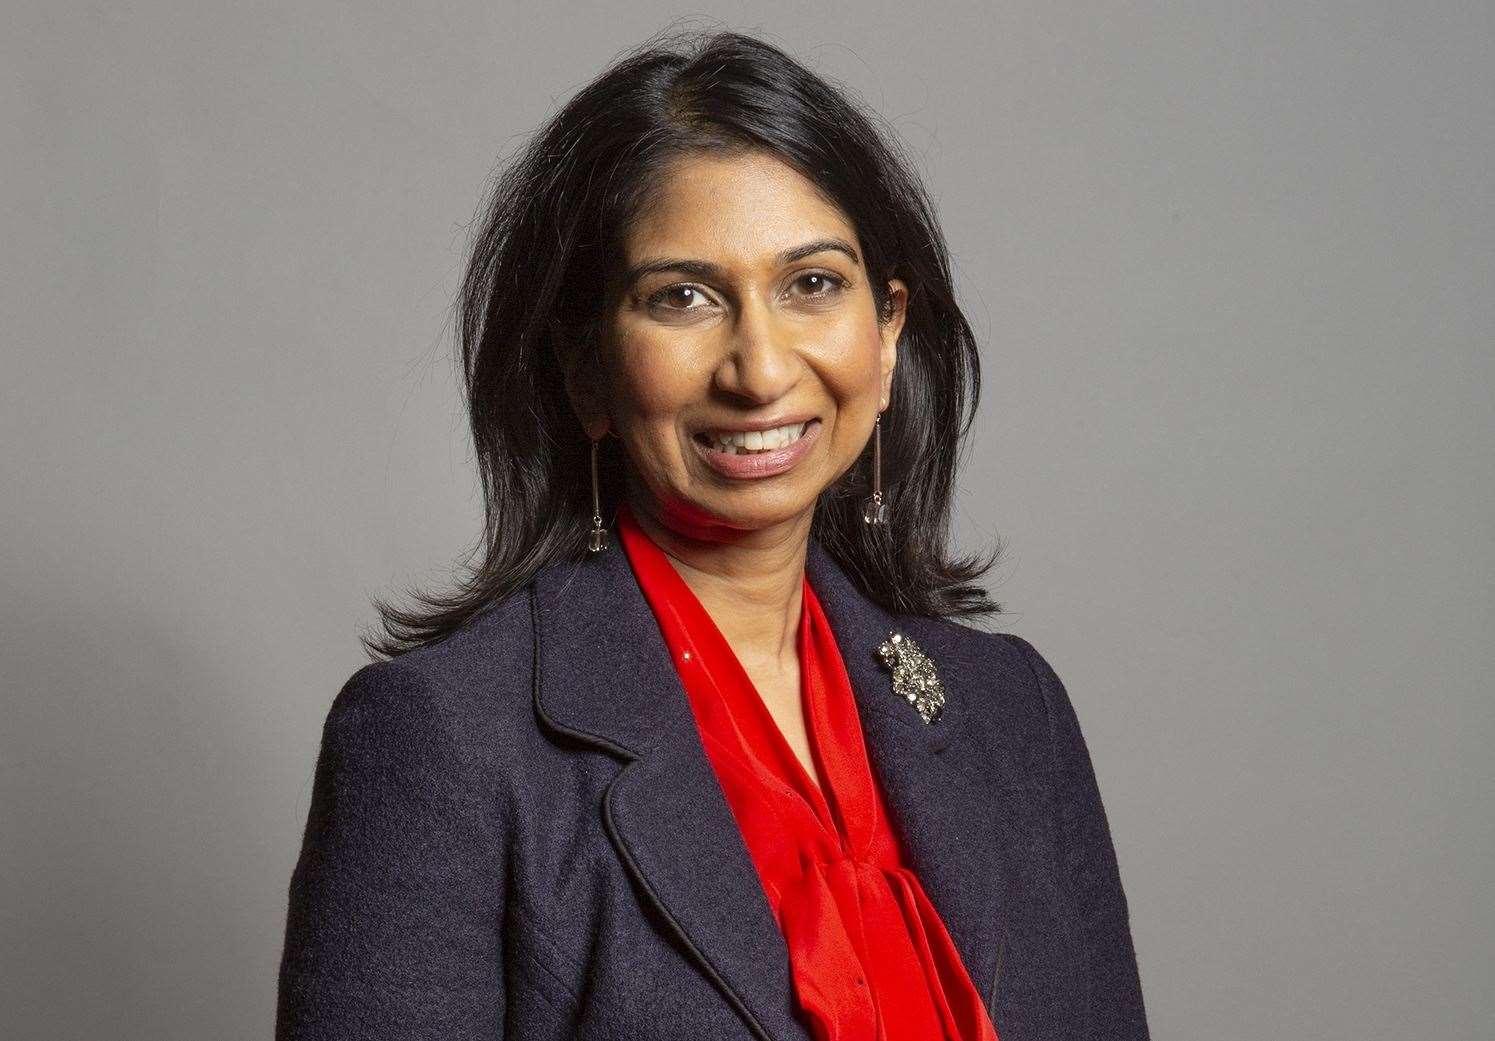 Suella Braverman resigned yesterday (October 19) from her role as Home Secretary